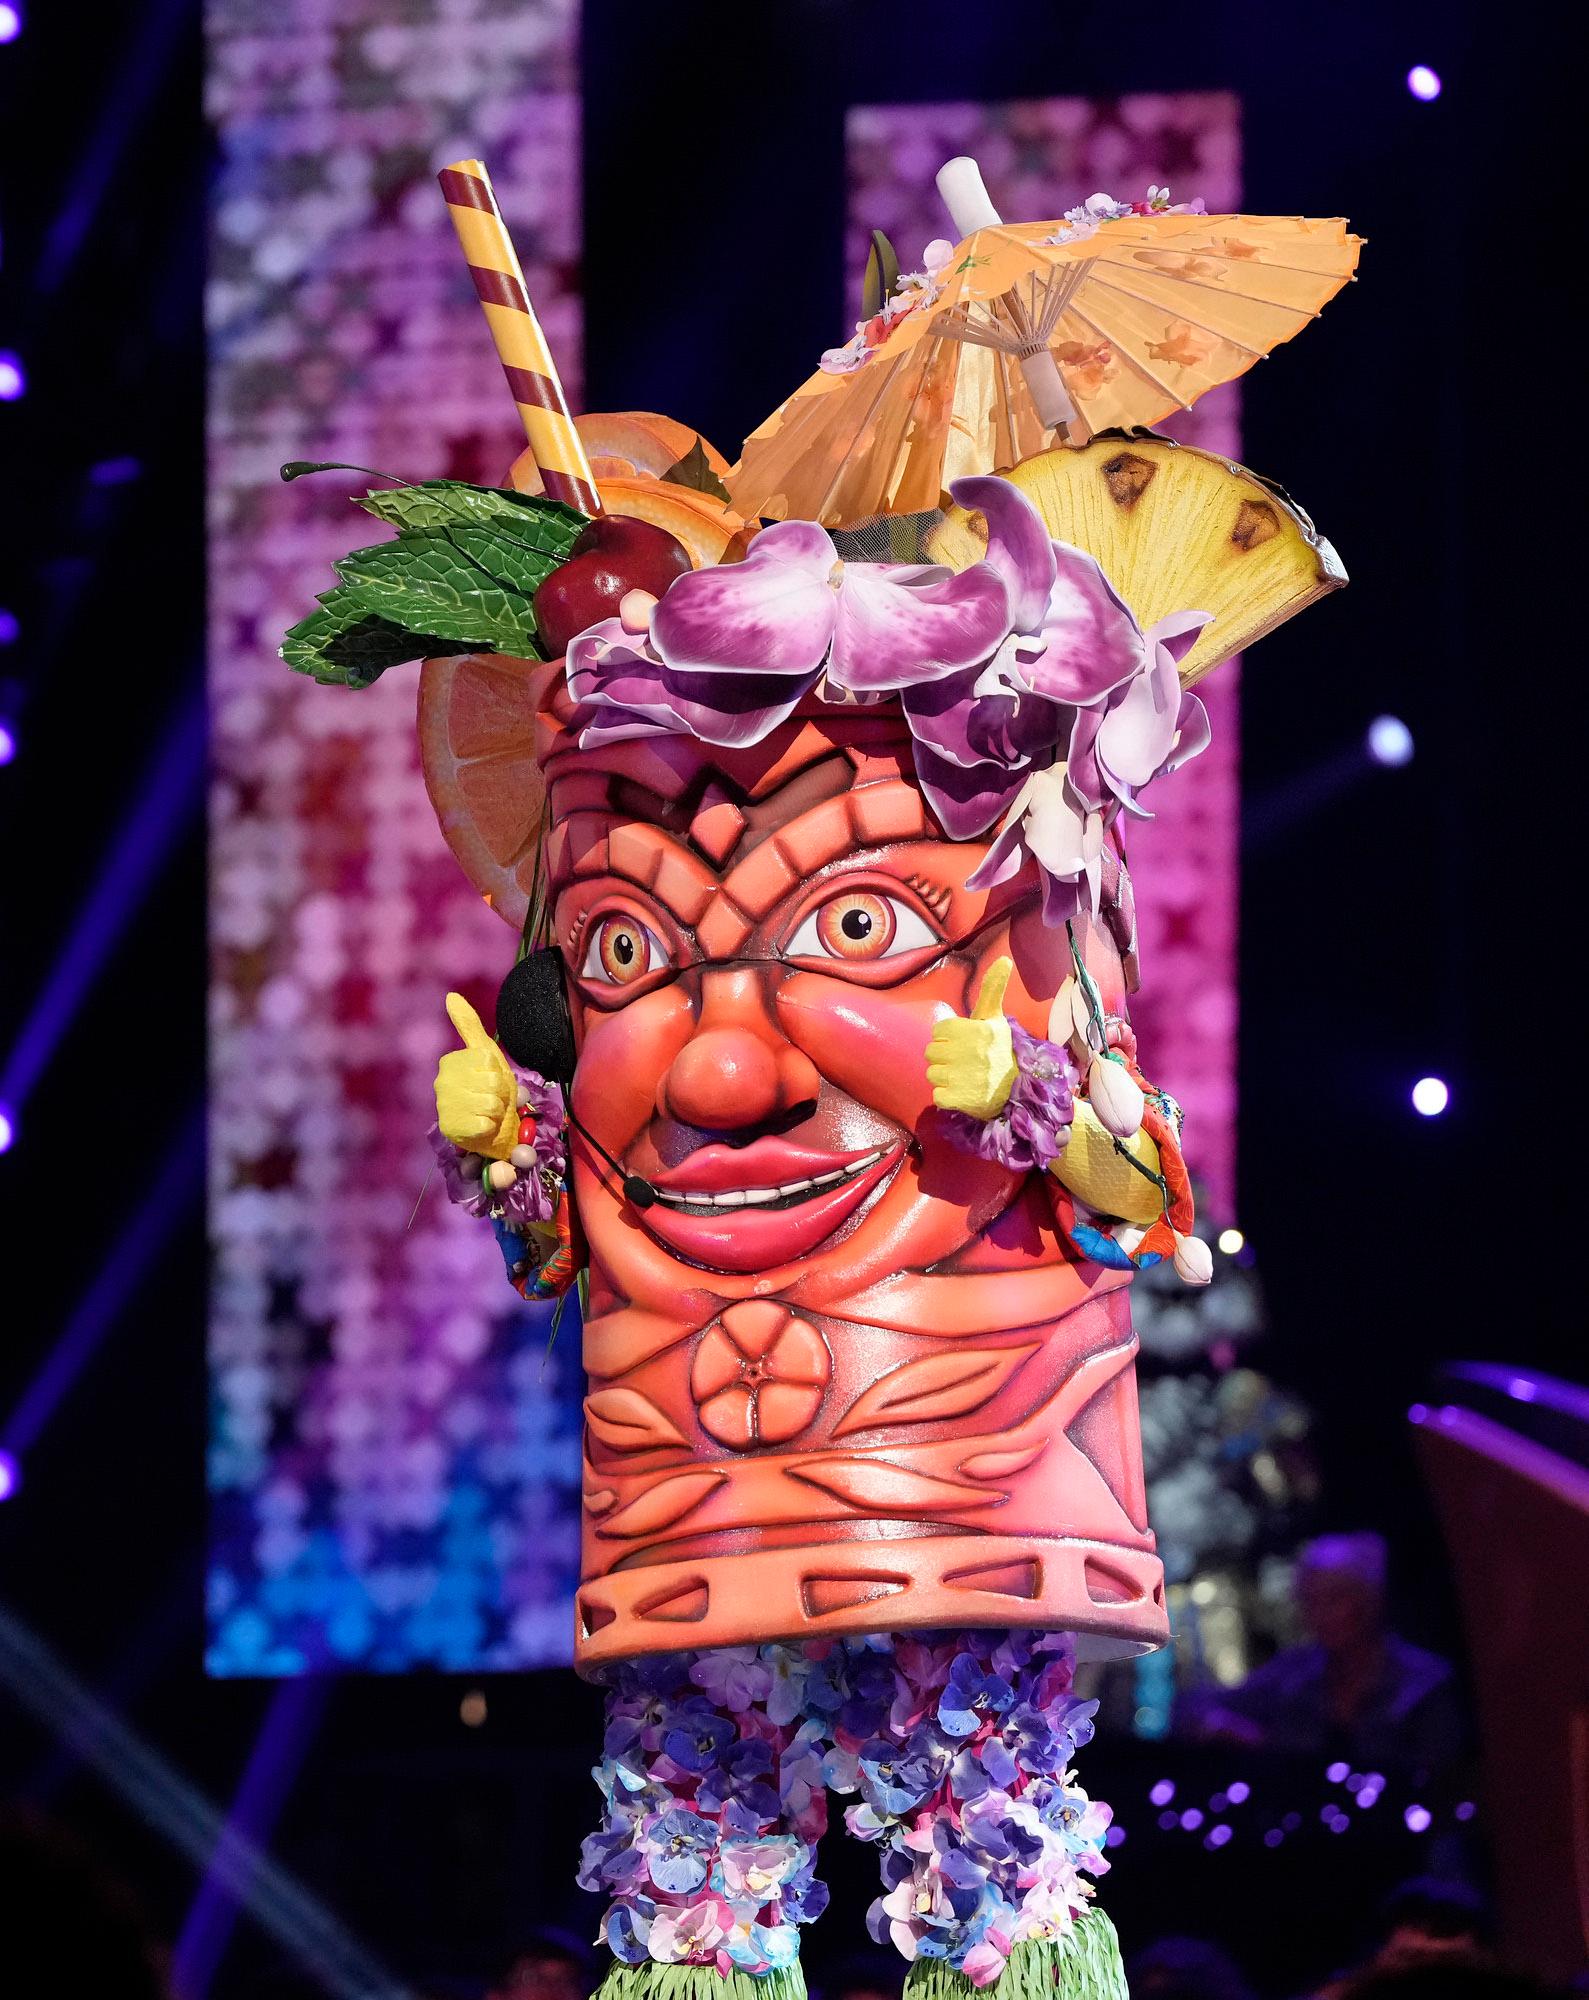 Who Is Tiki on The Masked Singer? Let's Look at the Clues Breaking